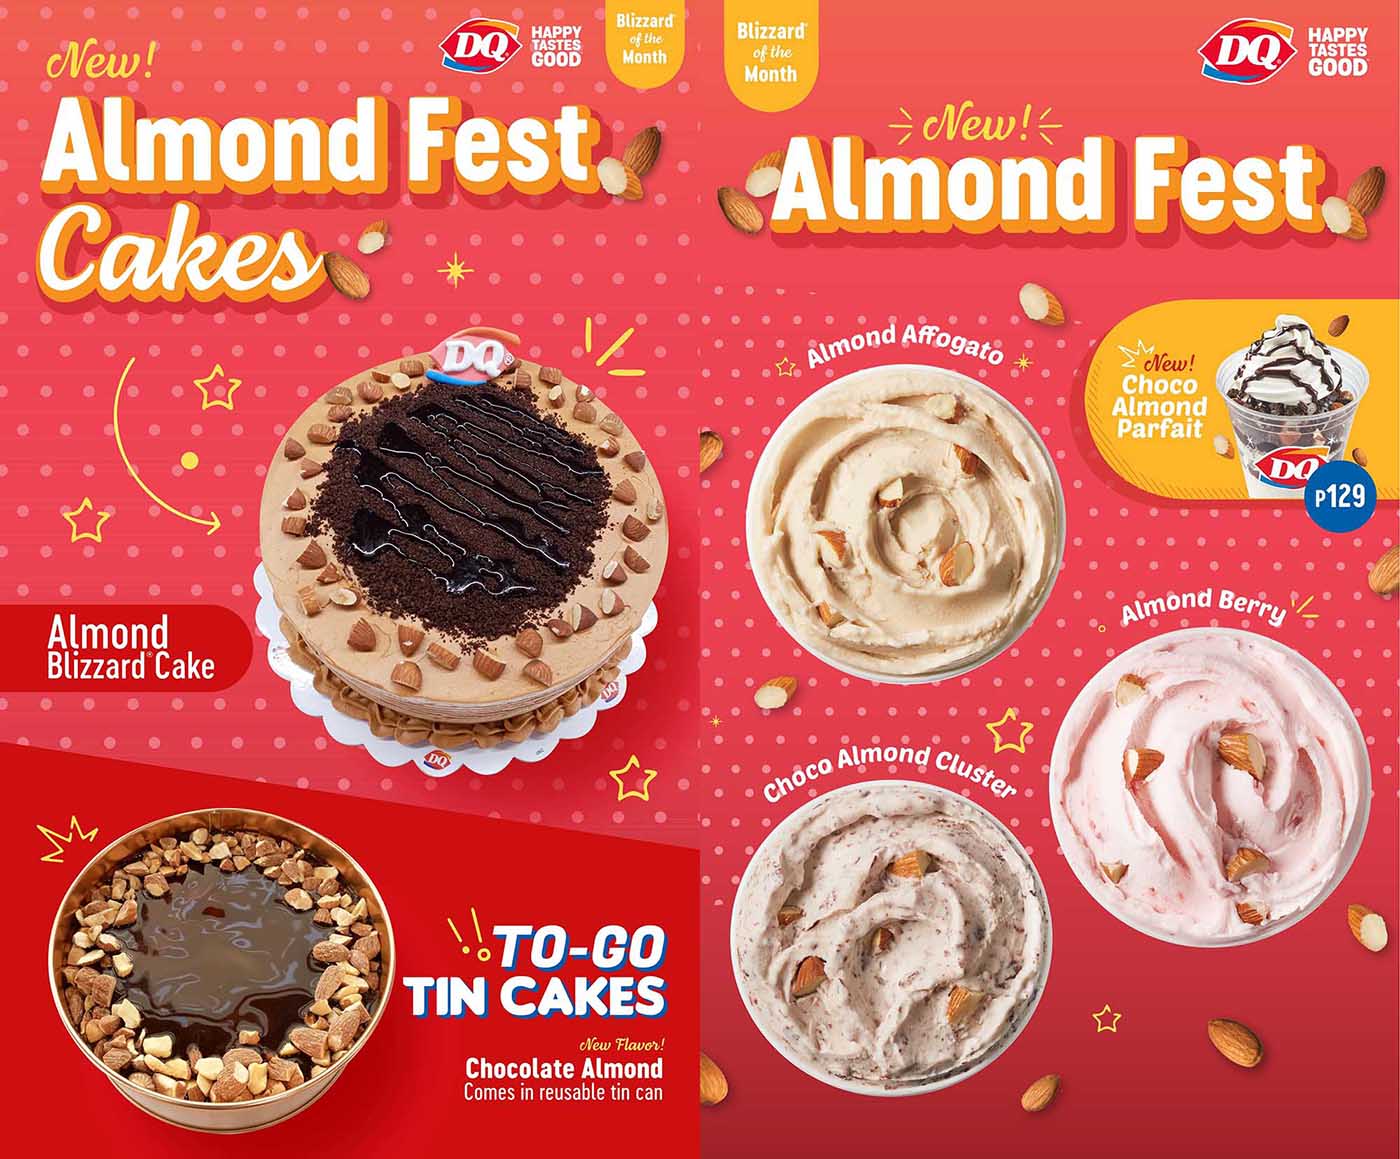 Almonds take the spotlight in Dairy Queen’s latest Blizzard of the Month offers